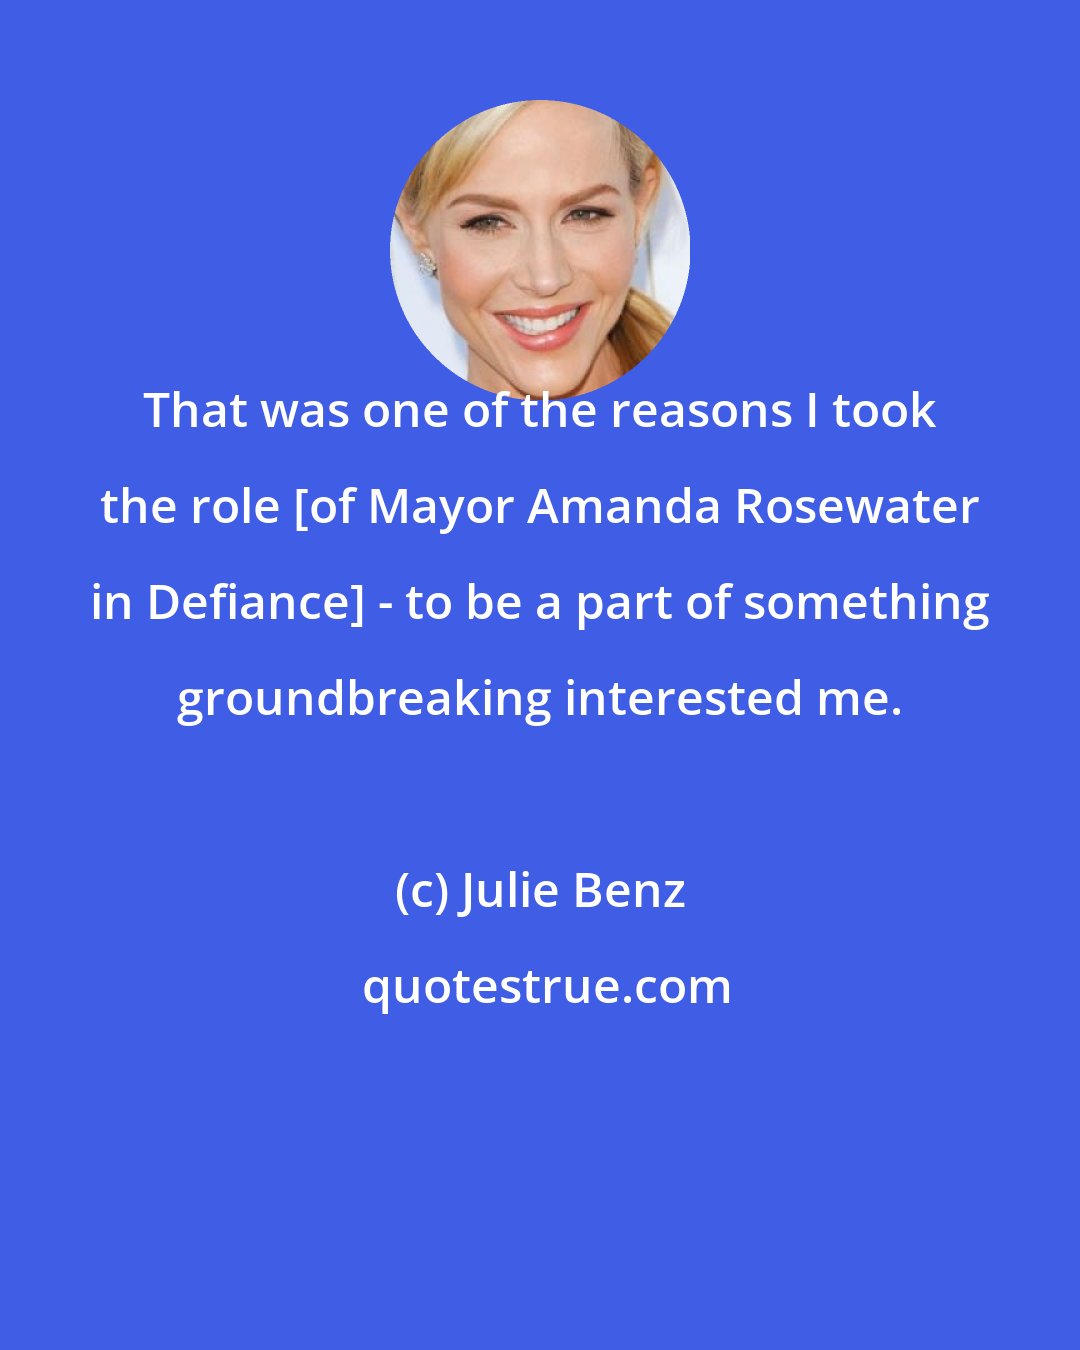 Julie Benz: That was one of the reasons I took the role [of Mayor Amanda Rosewater in Defiance] - to be a part of something groundbreaking interested me.